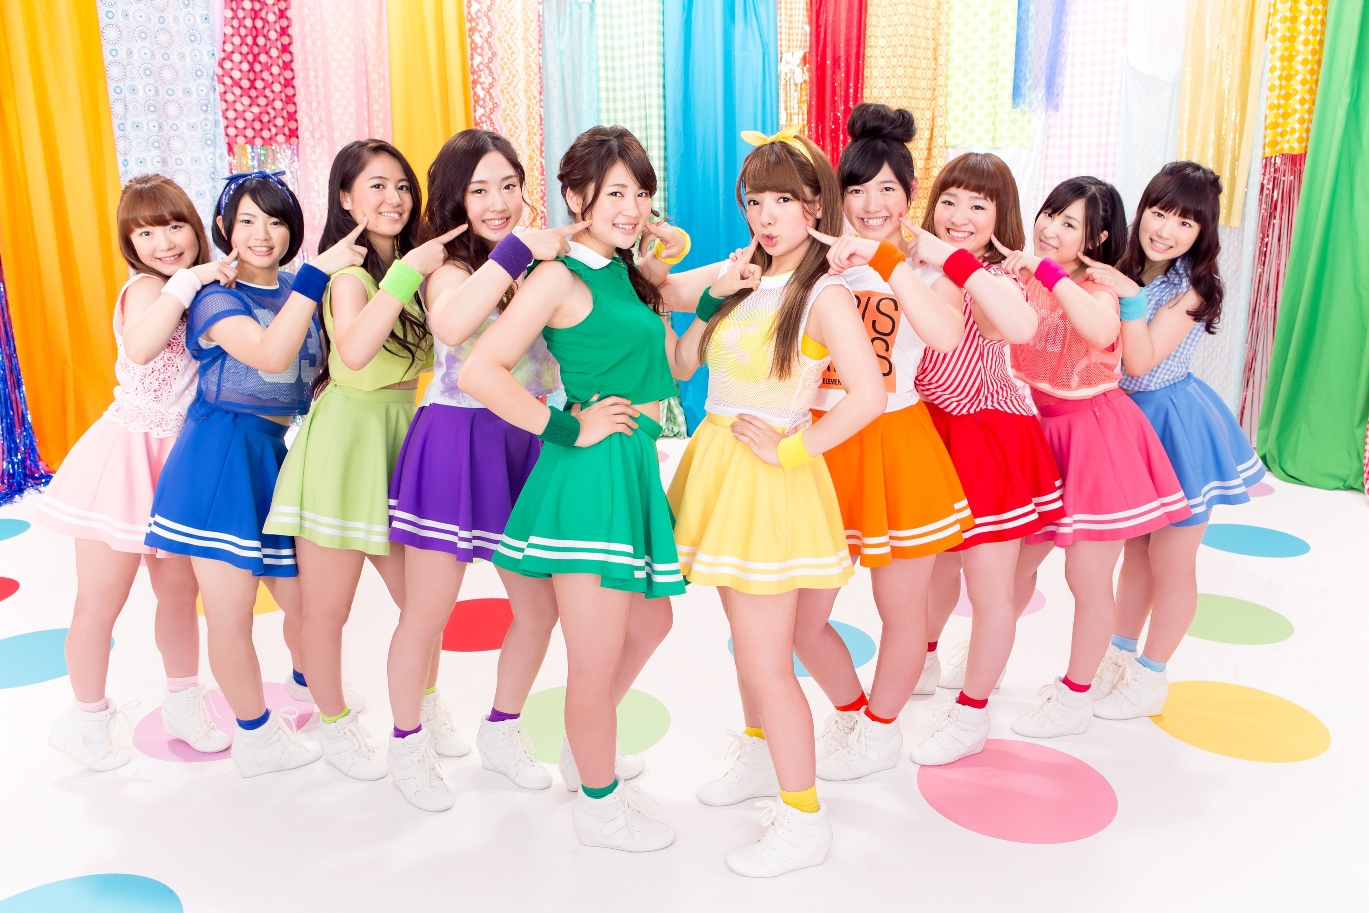 Chubbiness Has Revealed MV for 1st song “Manmadieya”!